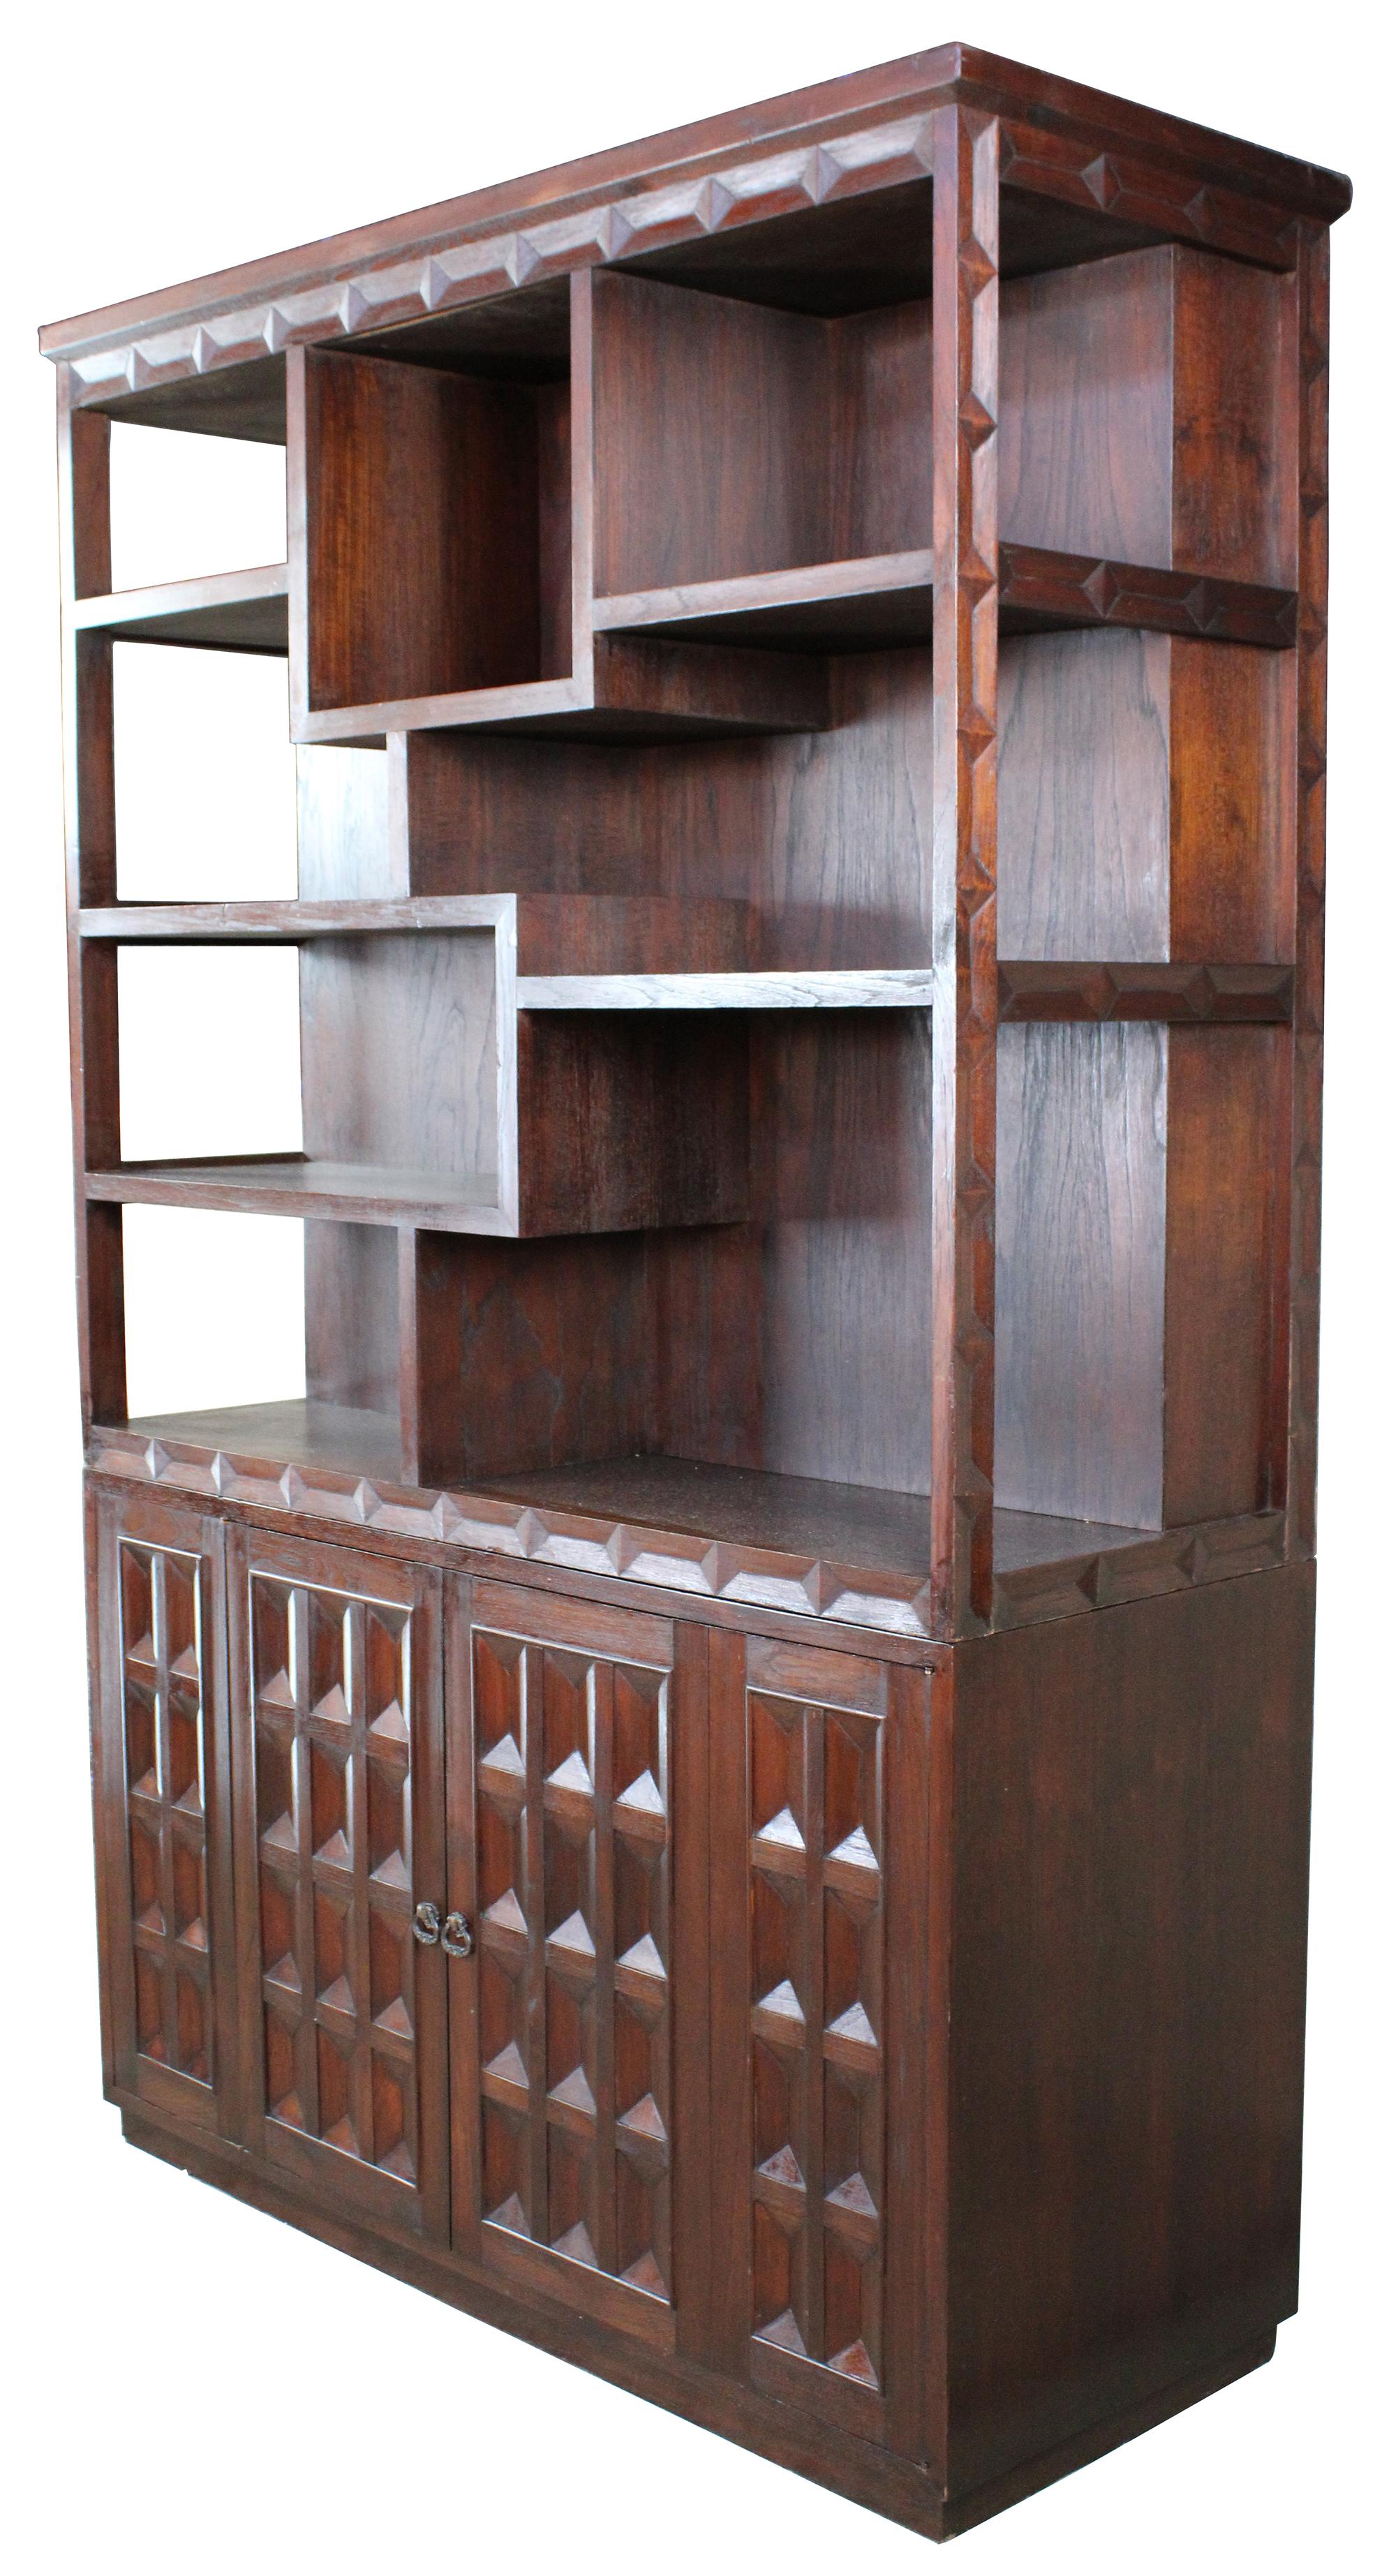 Brutalist room divider, circa 1960s. A double sided design with sculptural and traditional shelving. Great for display of books or collectibles. The base features additional storage and drawers.
 